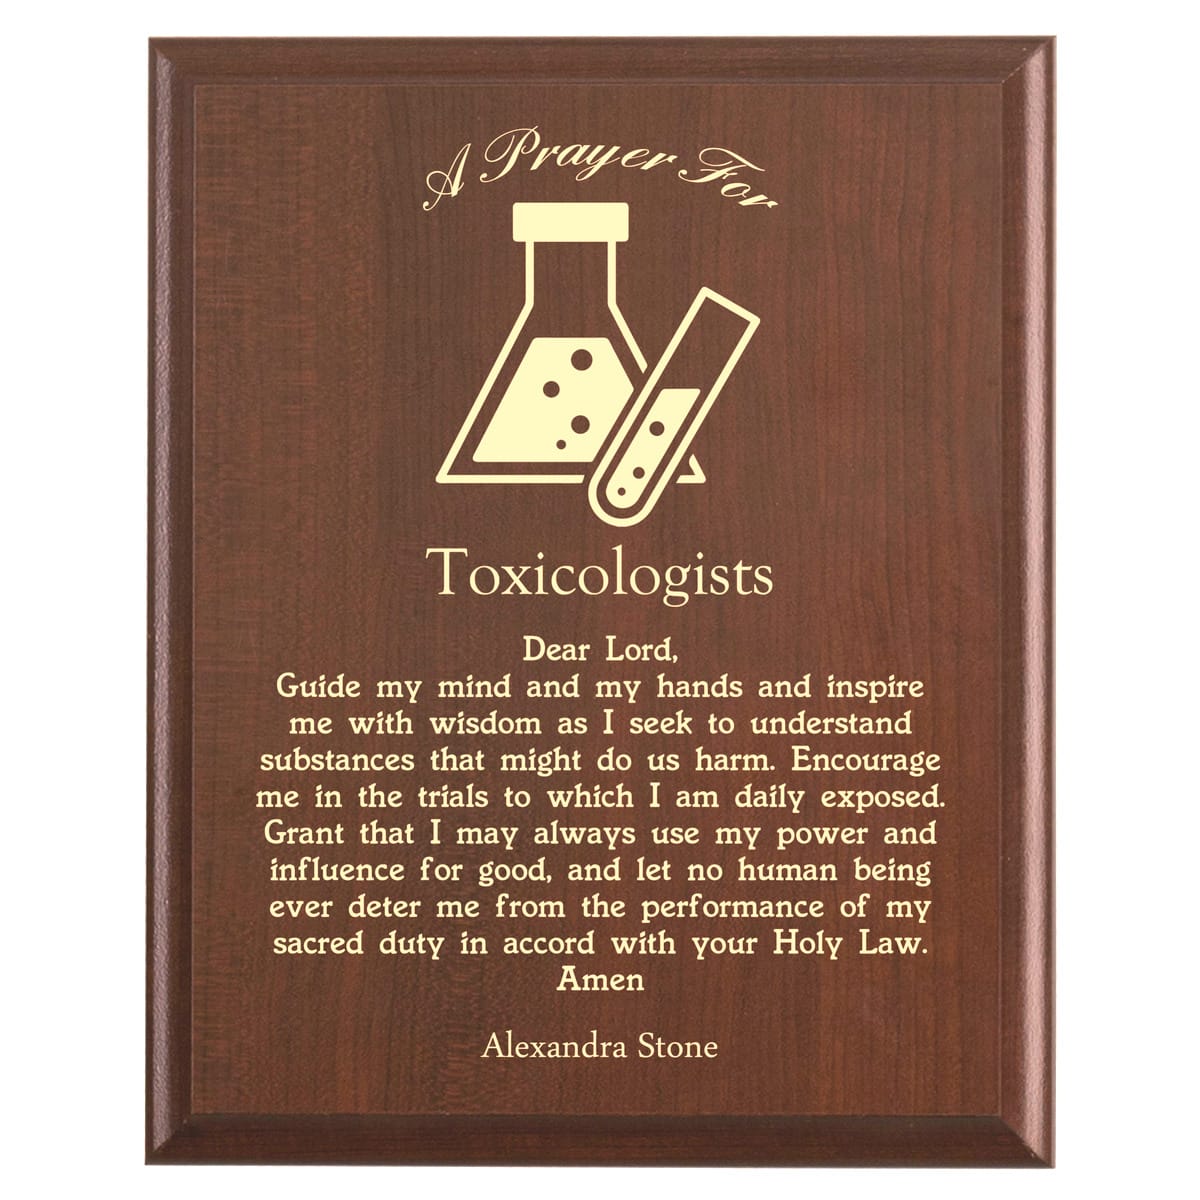 Plaque photo: Toxicologist Prayer Plaque design with free personalization. Wood style finish with customized text.